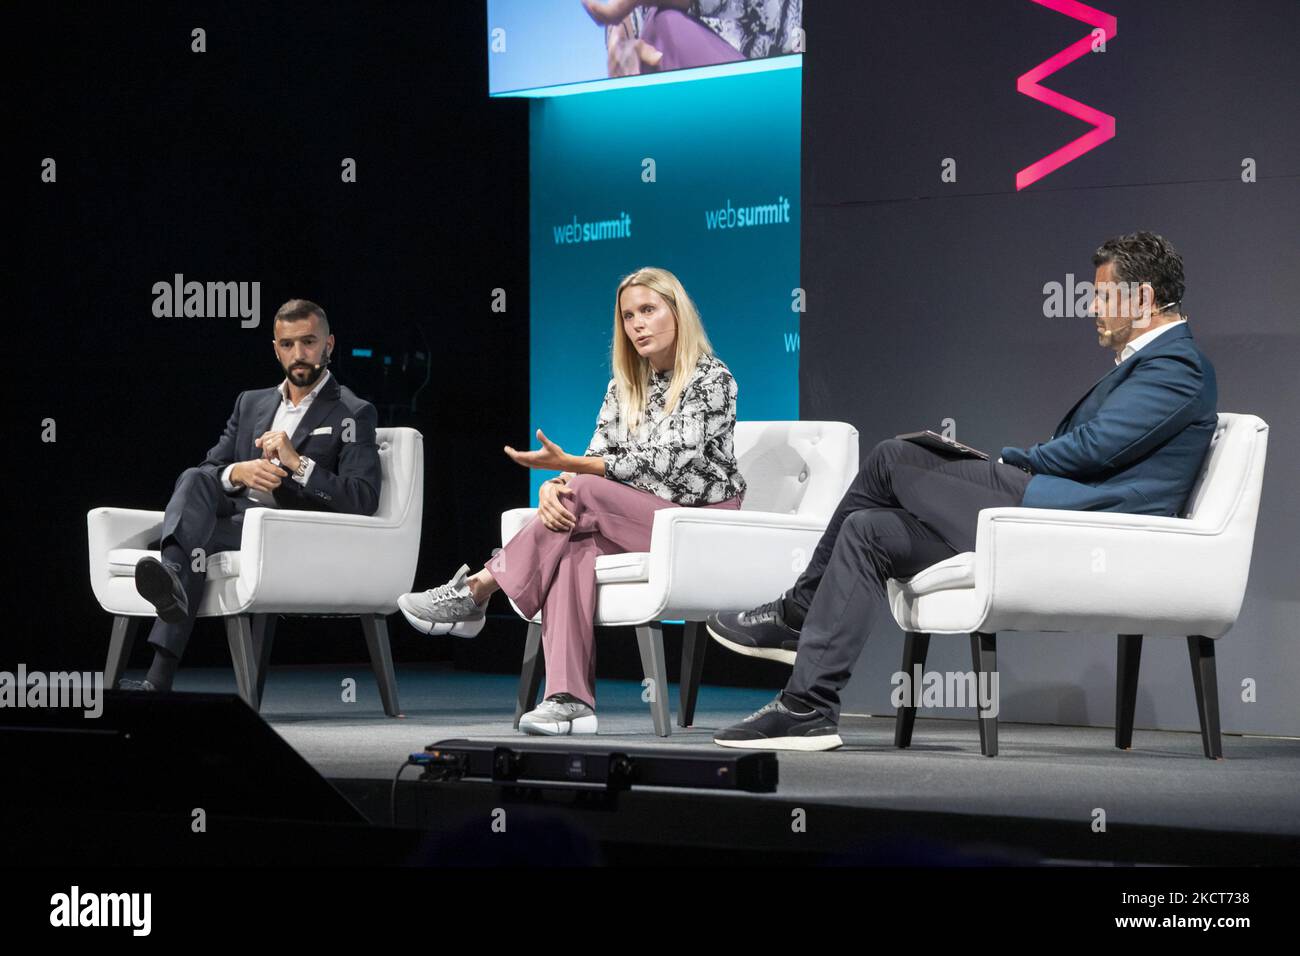 Simão Sabrosa(SL Benfica), Cloé Lacasse(Benfica Womens Team) tradesport stage during second day of Web Summit 2021 in Lisbon, Portugal on November 2, 2021. (Photo by Rita Franca/NurPhoto) Stock Photo